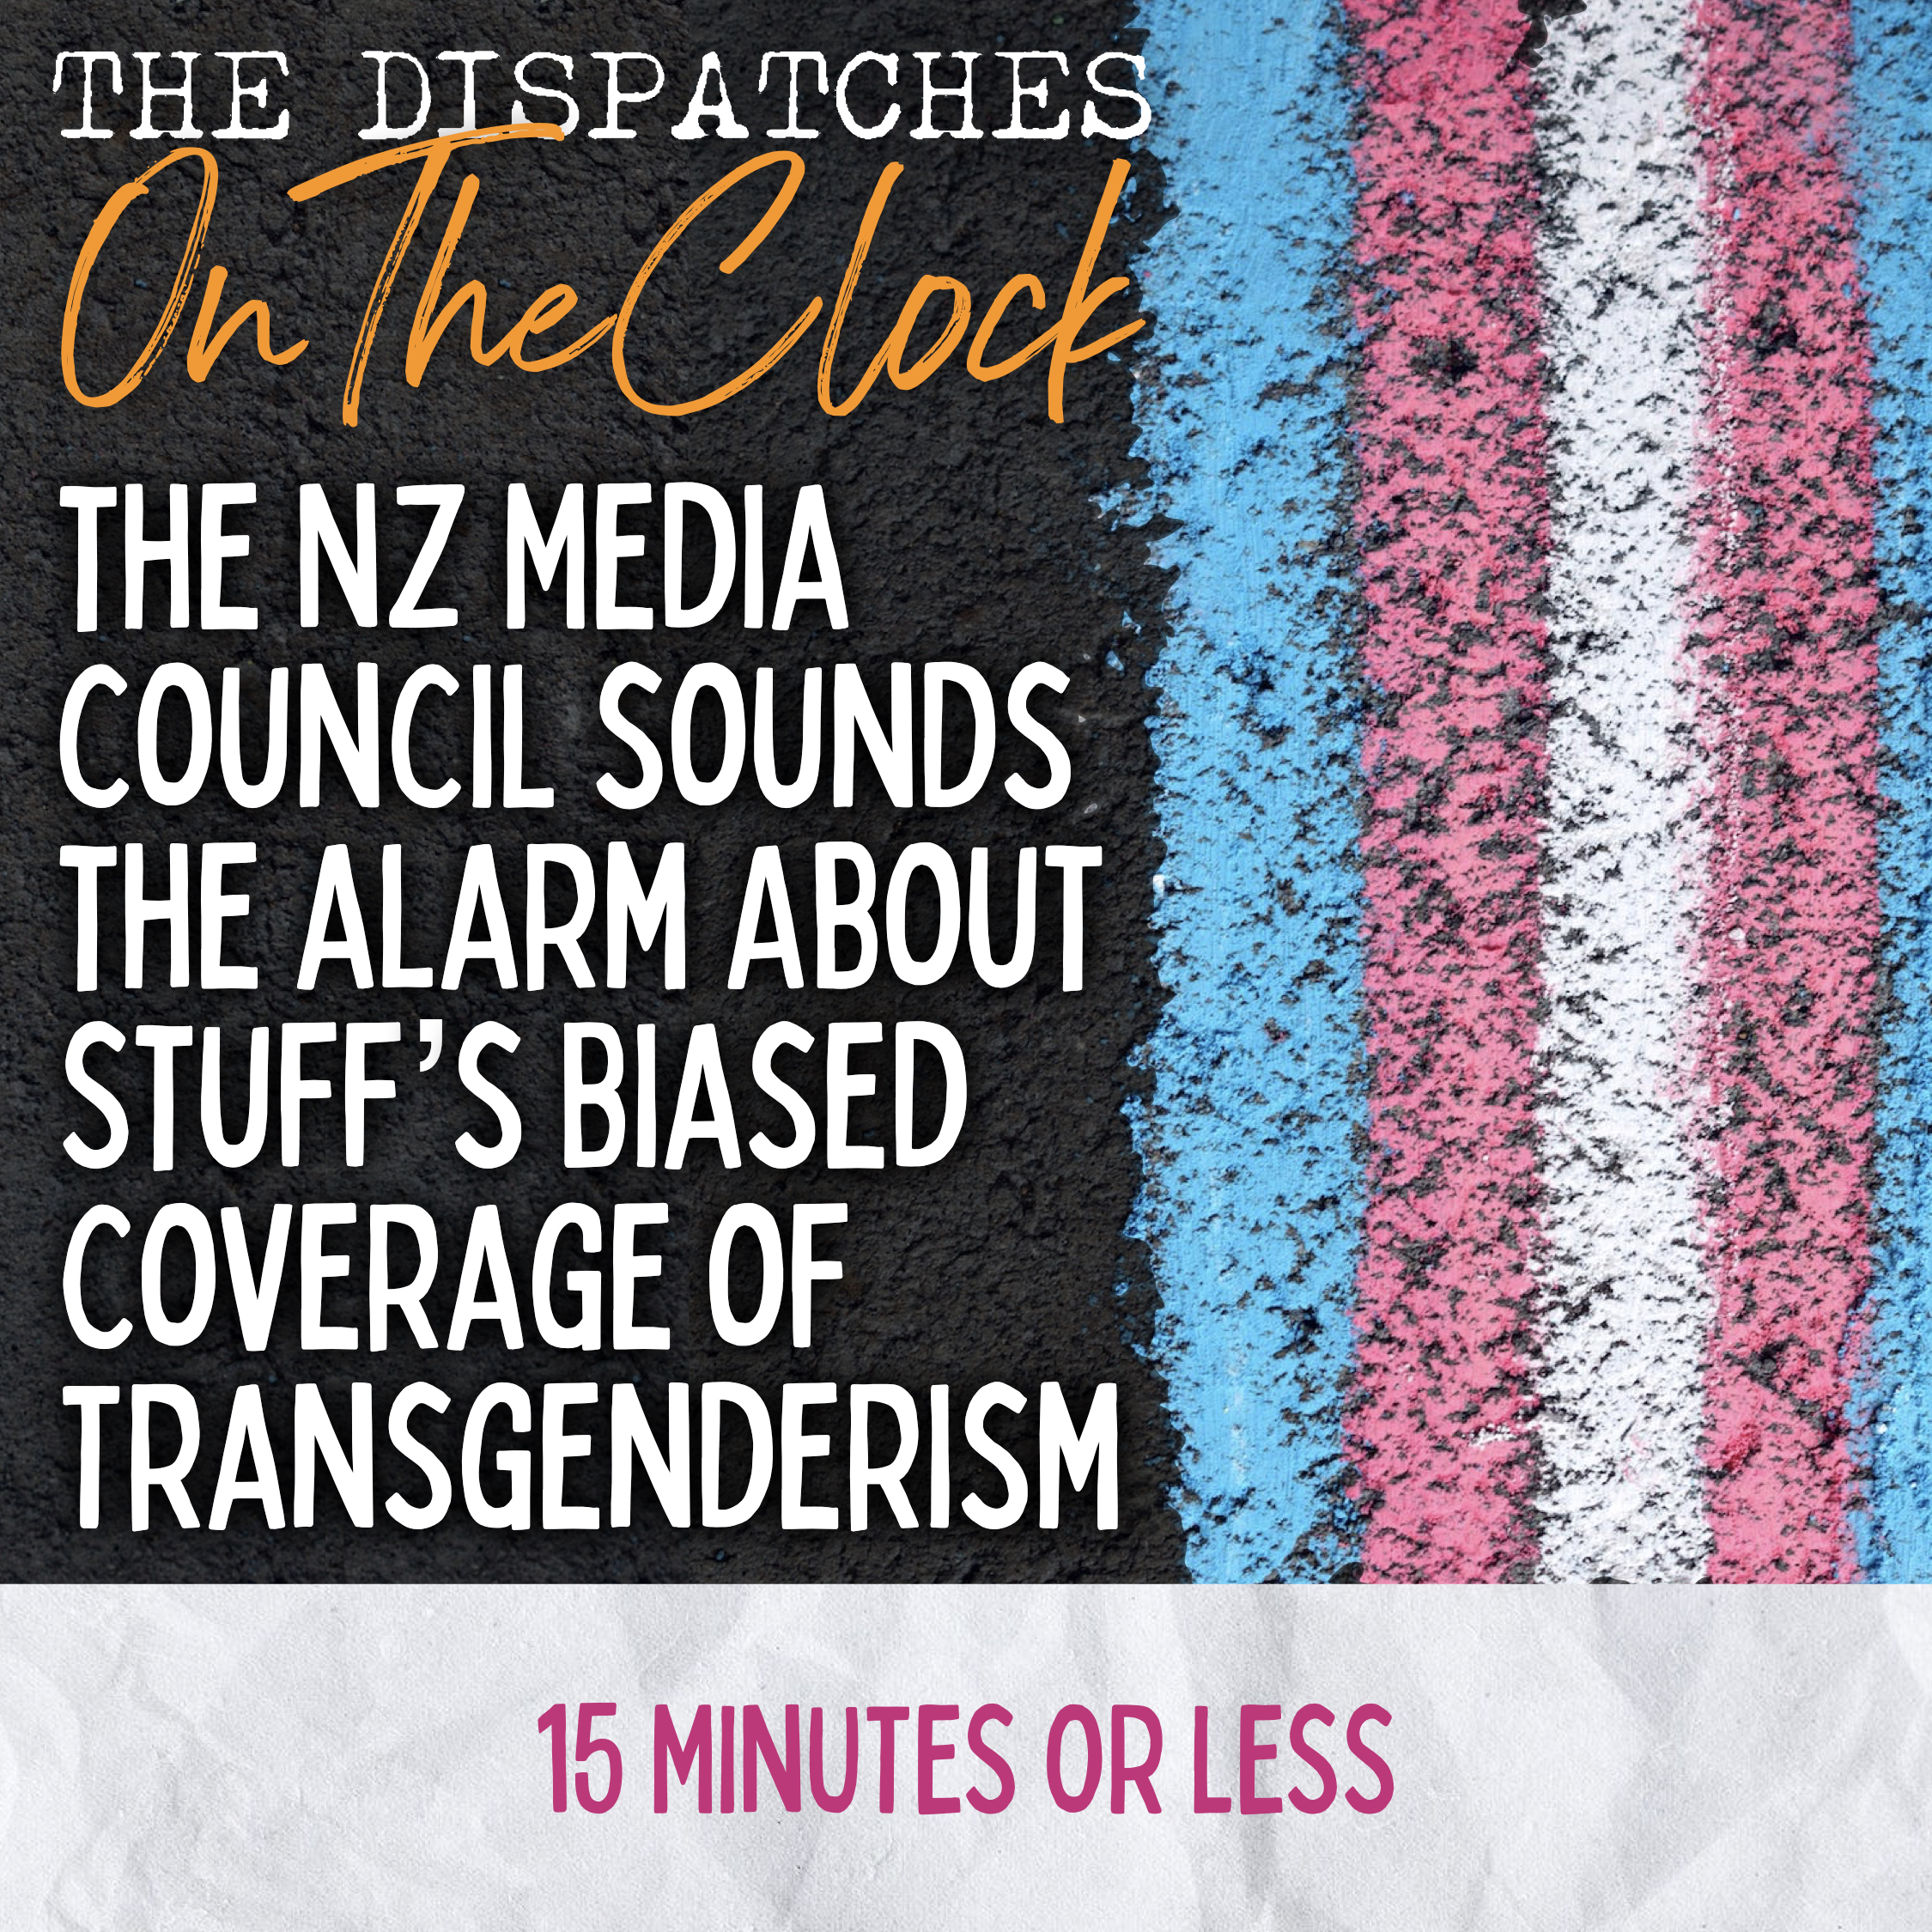 ON THE CLOCK | NZ Media Council Raises Concerns About Stuff’s Biased Coverage of Transgenderism